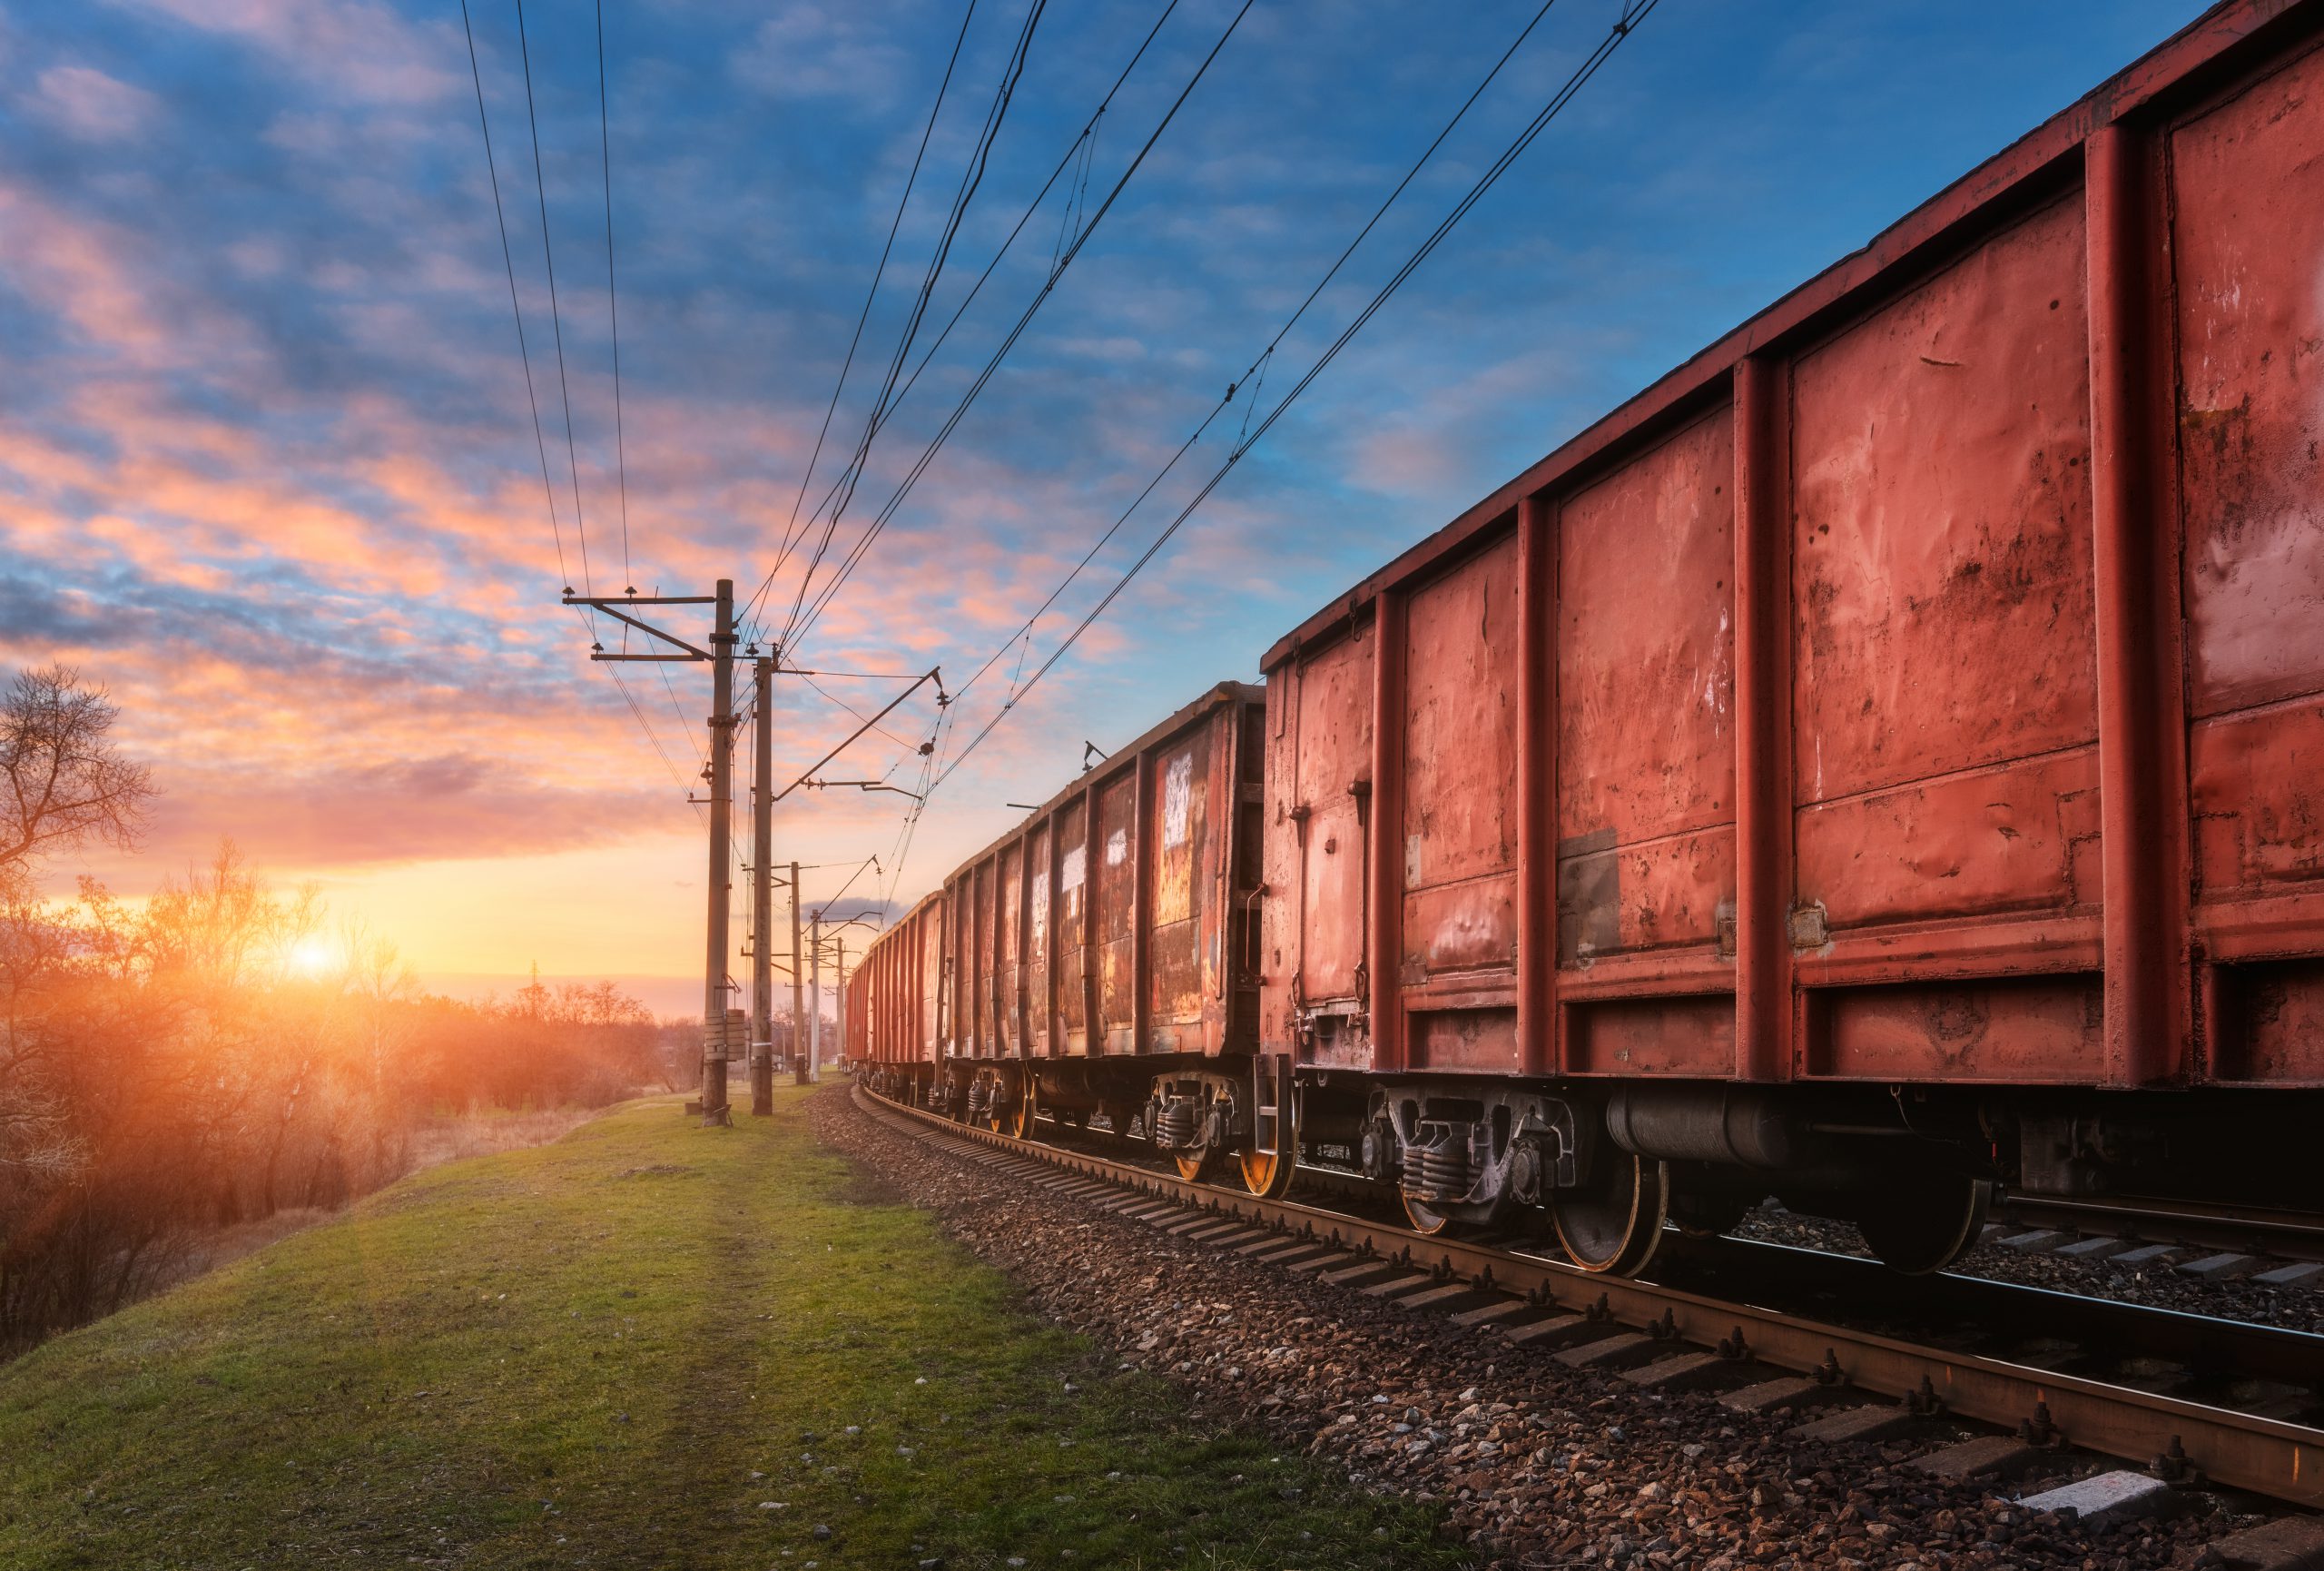 Railway station with cargo wagons and train against sunny sky with clouds in the evening. Colorful industrial landscape. Railroad with blue sky. Railway platform. Heavy industry. Cargo shipping